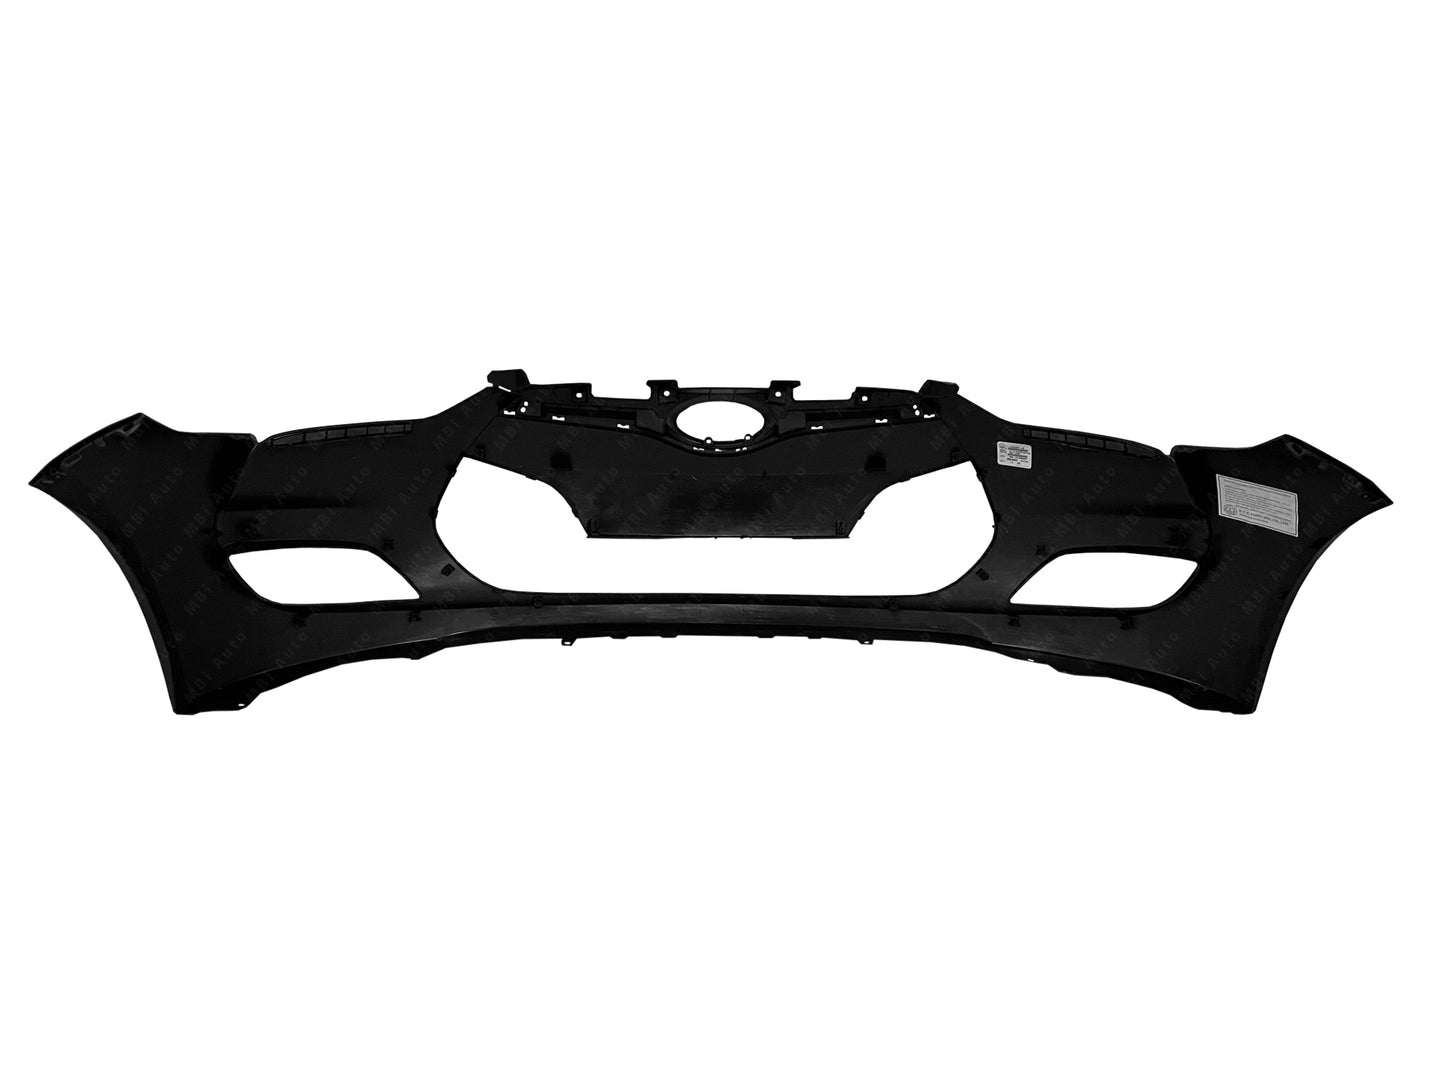 Hyundai Veloster 2012 - 2017 Front Bumper Cover 12 - 17 HY1000189 Bumper King